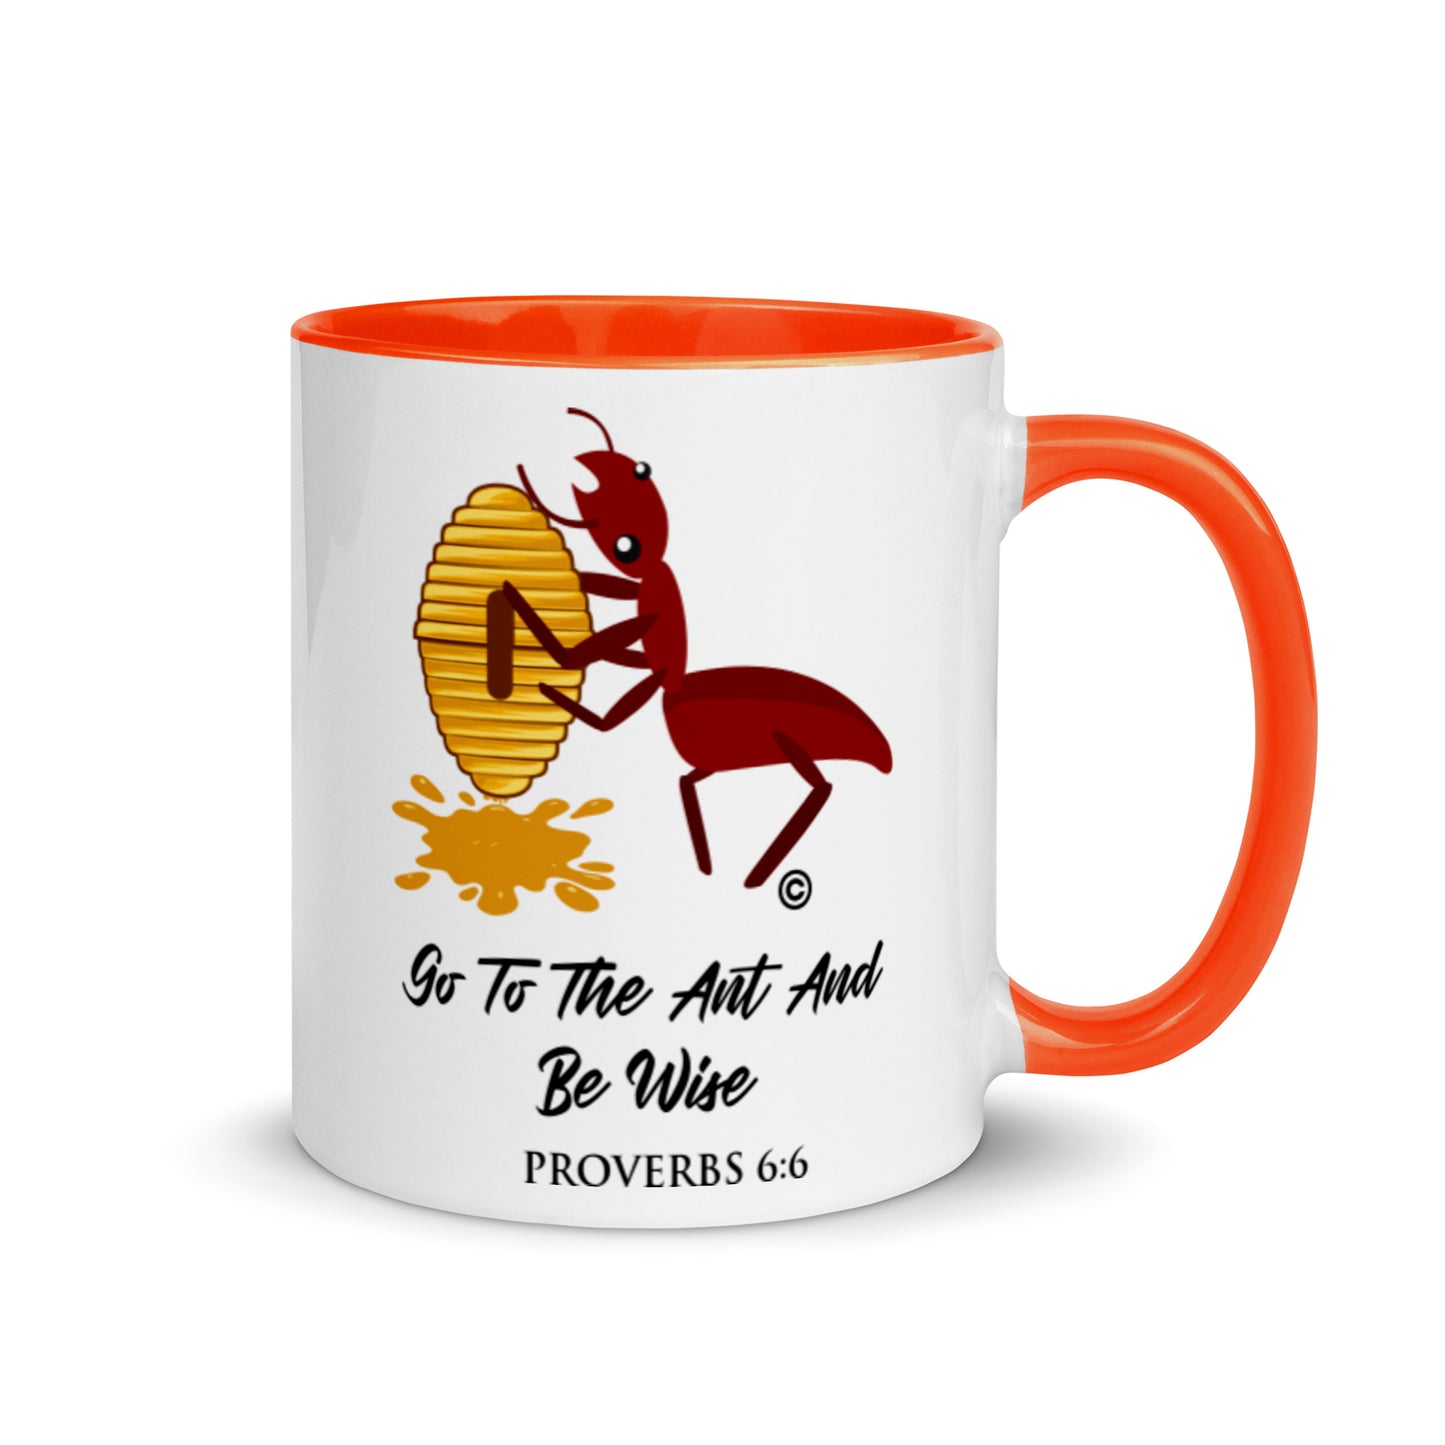 Proverbs 6:6 Mug with Color Inside